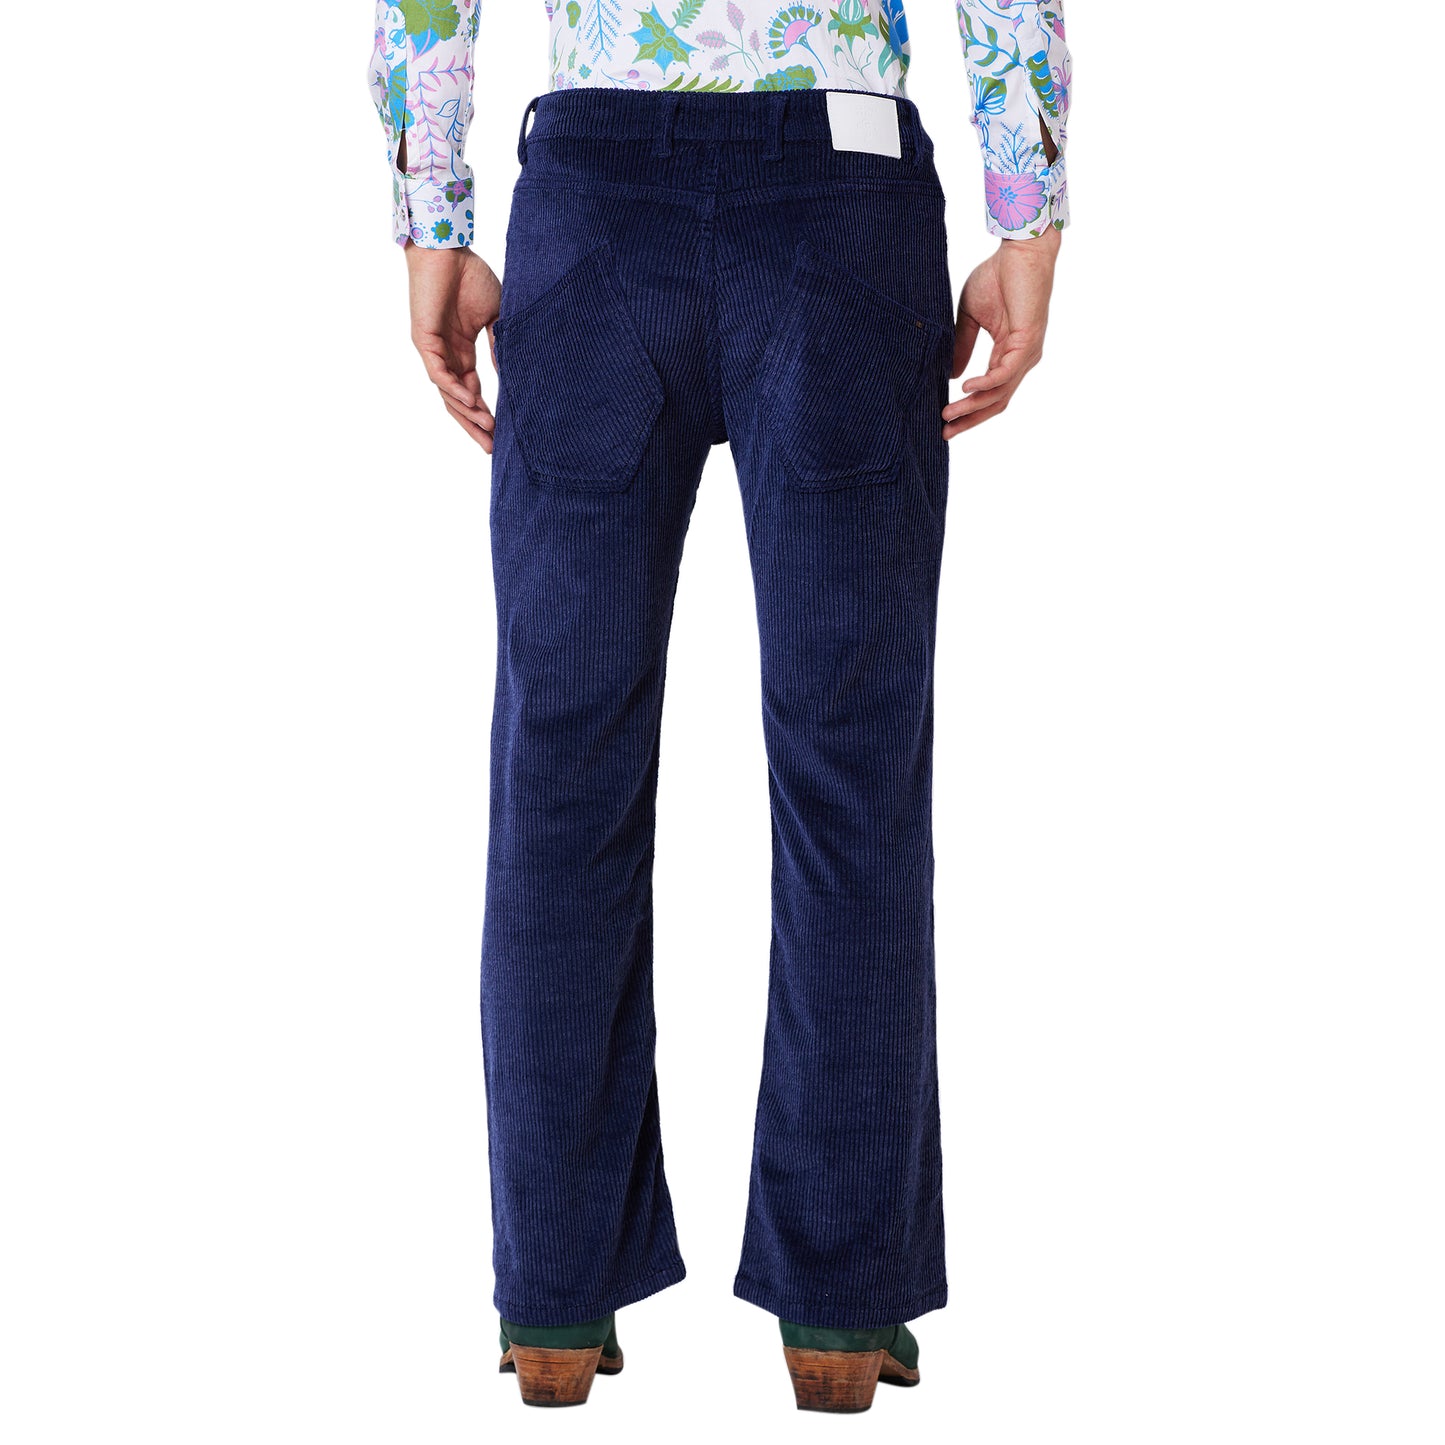 Indigo Blue Relaxed Fit Low Rise Boot-cut Jeans For Men